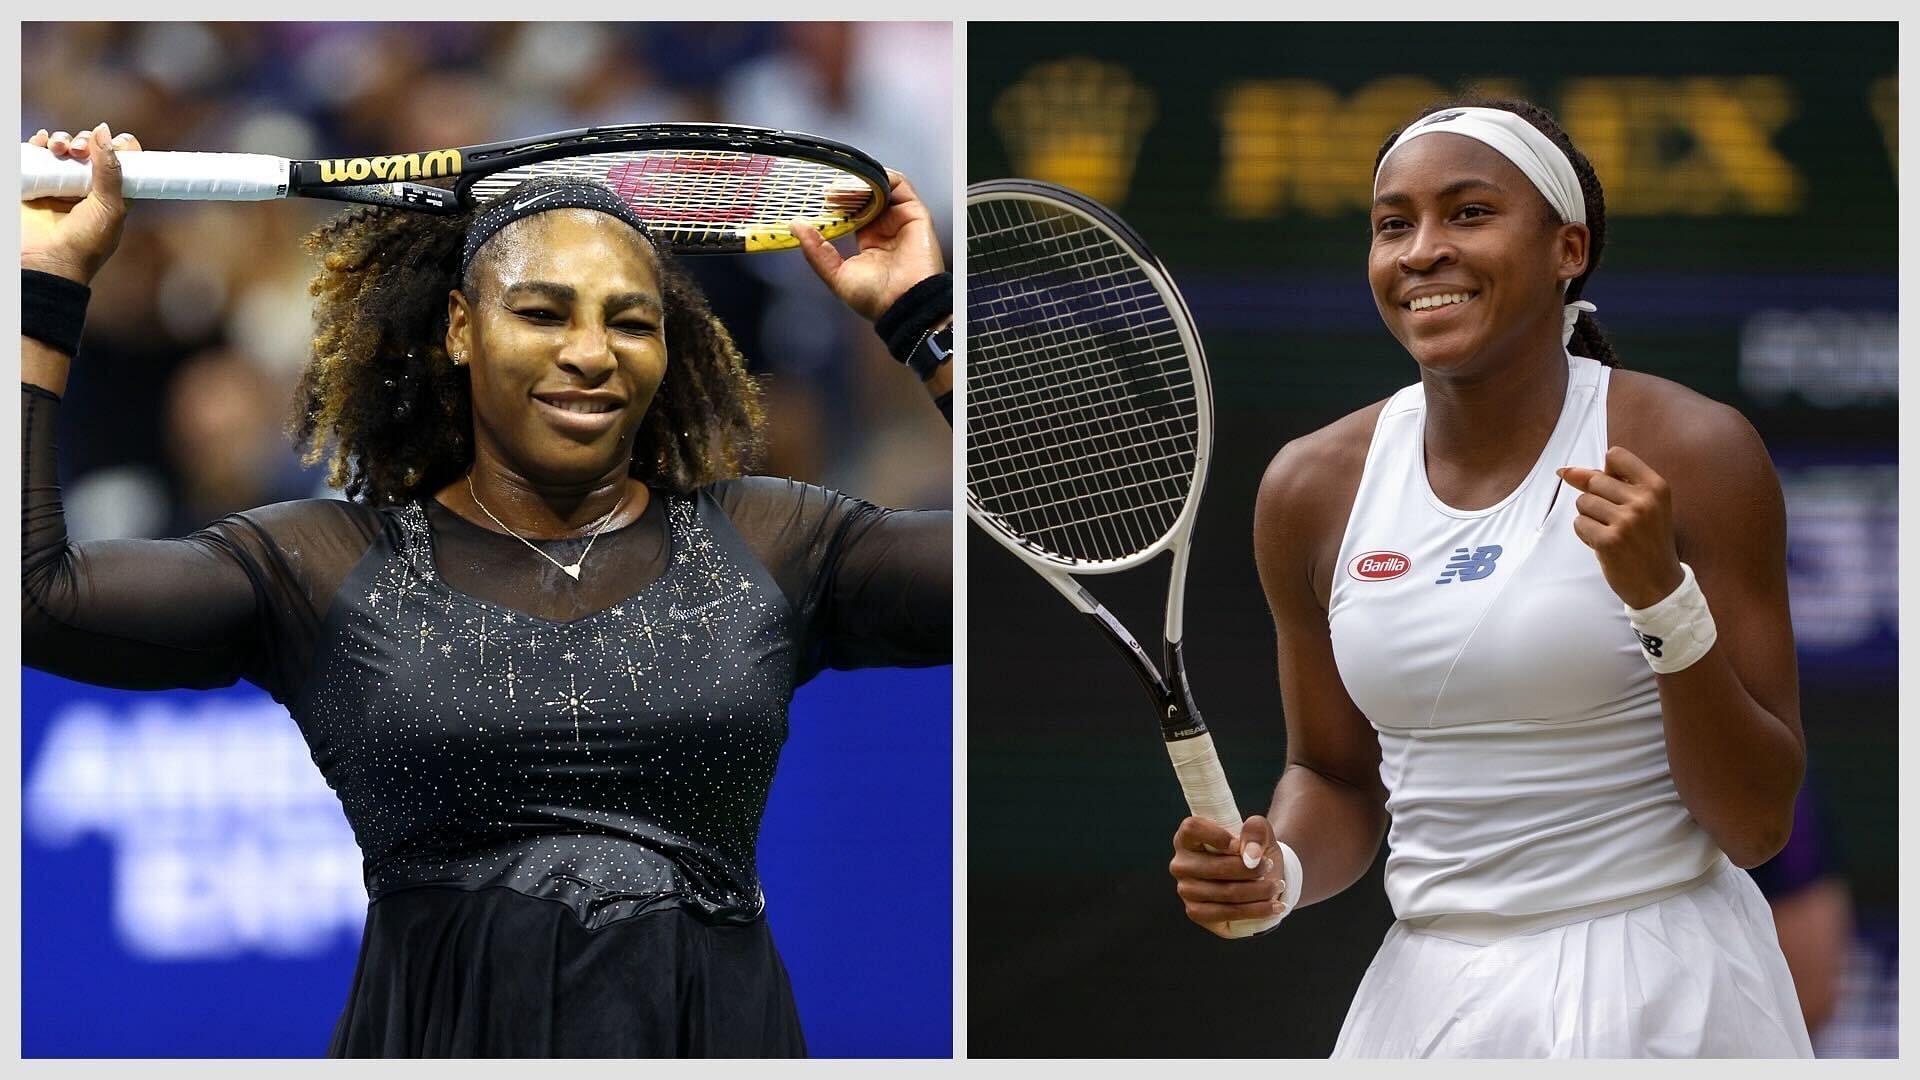 5 tennis players who made cameo appearances in TV shows ft. Serena Williams and Coco Gauff